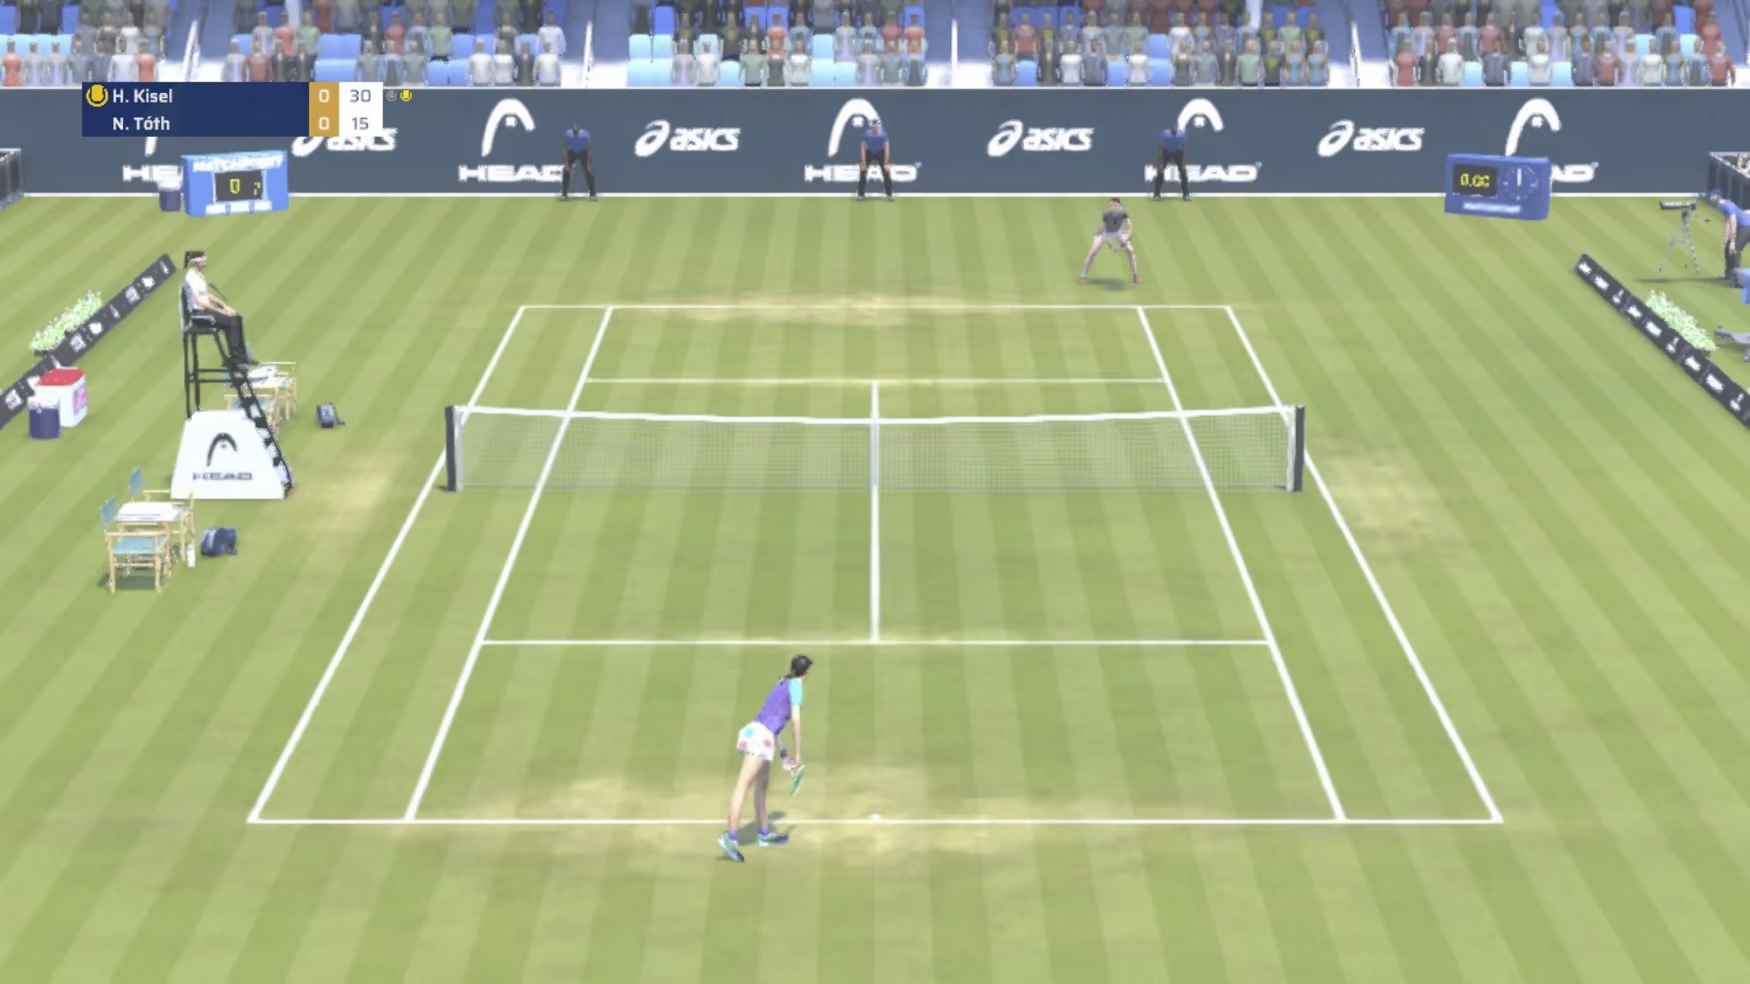 Matchpoint Tennis Championships gameplay